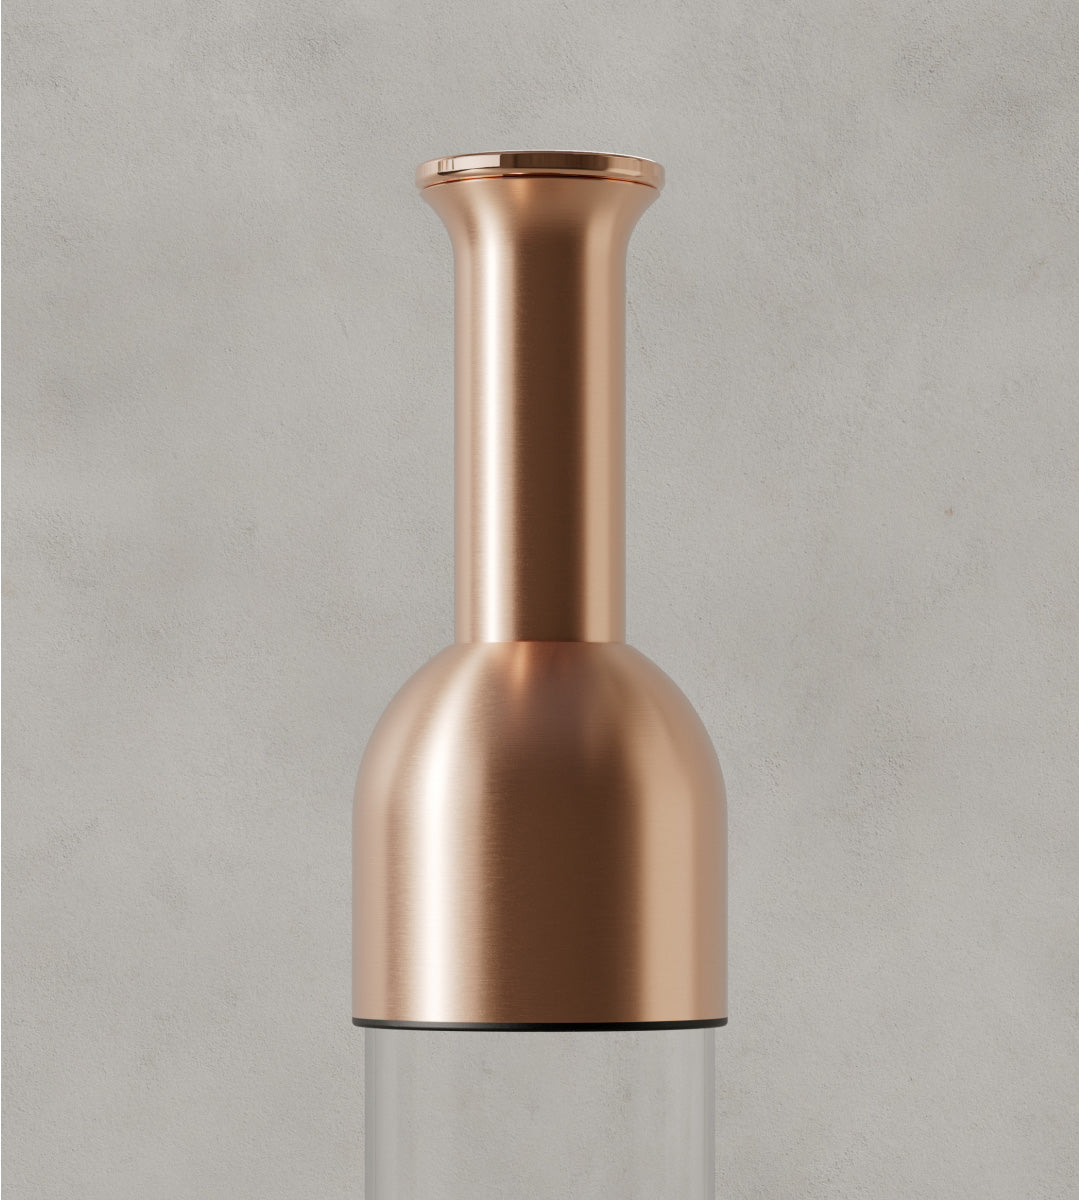 Detail of copper satin finish on the eto wine decanter